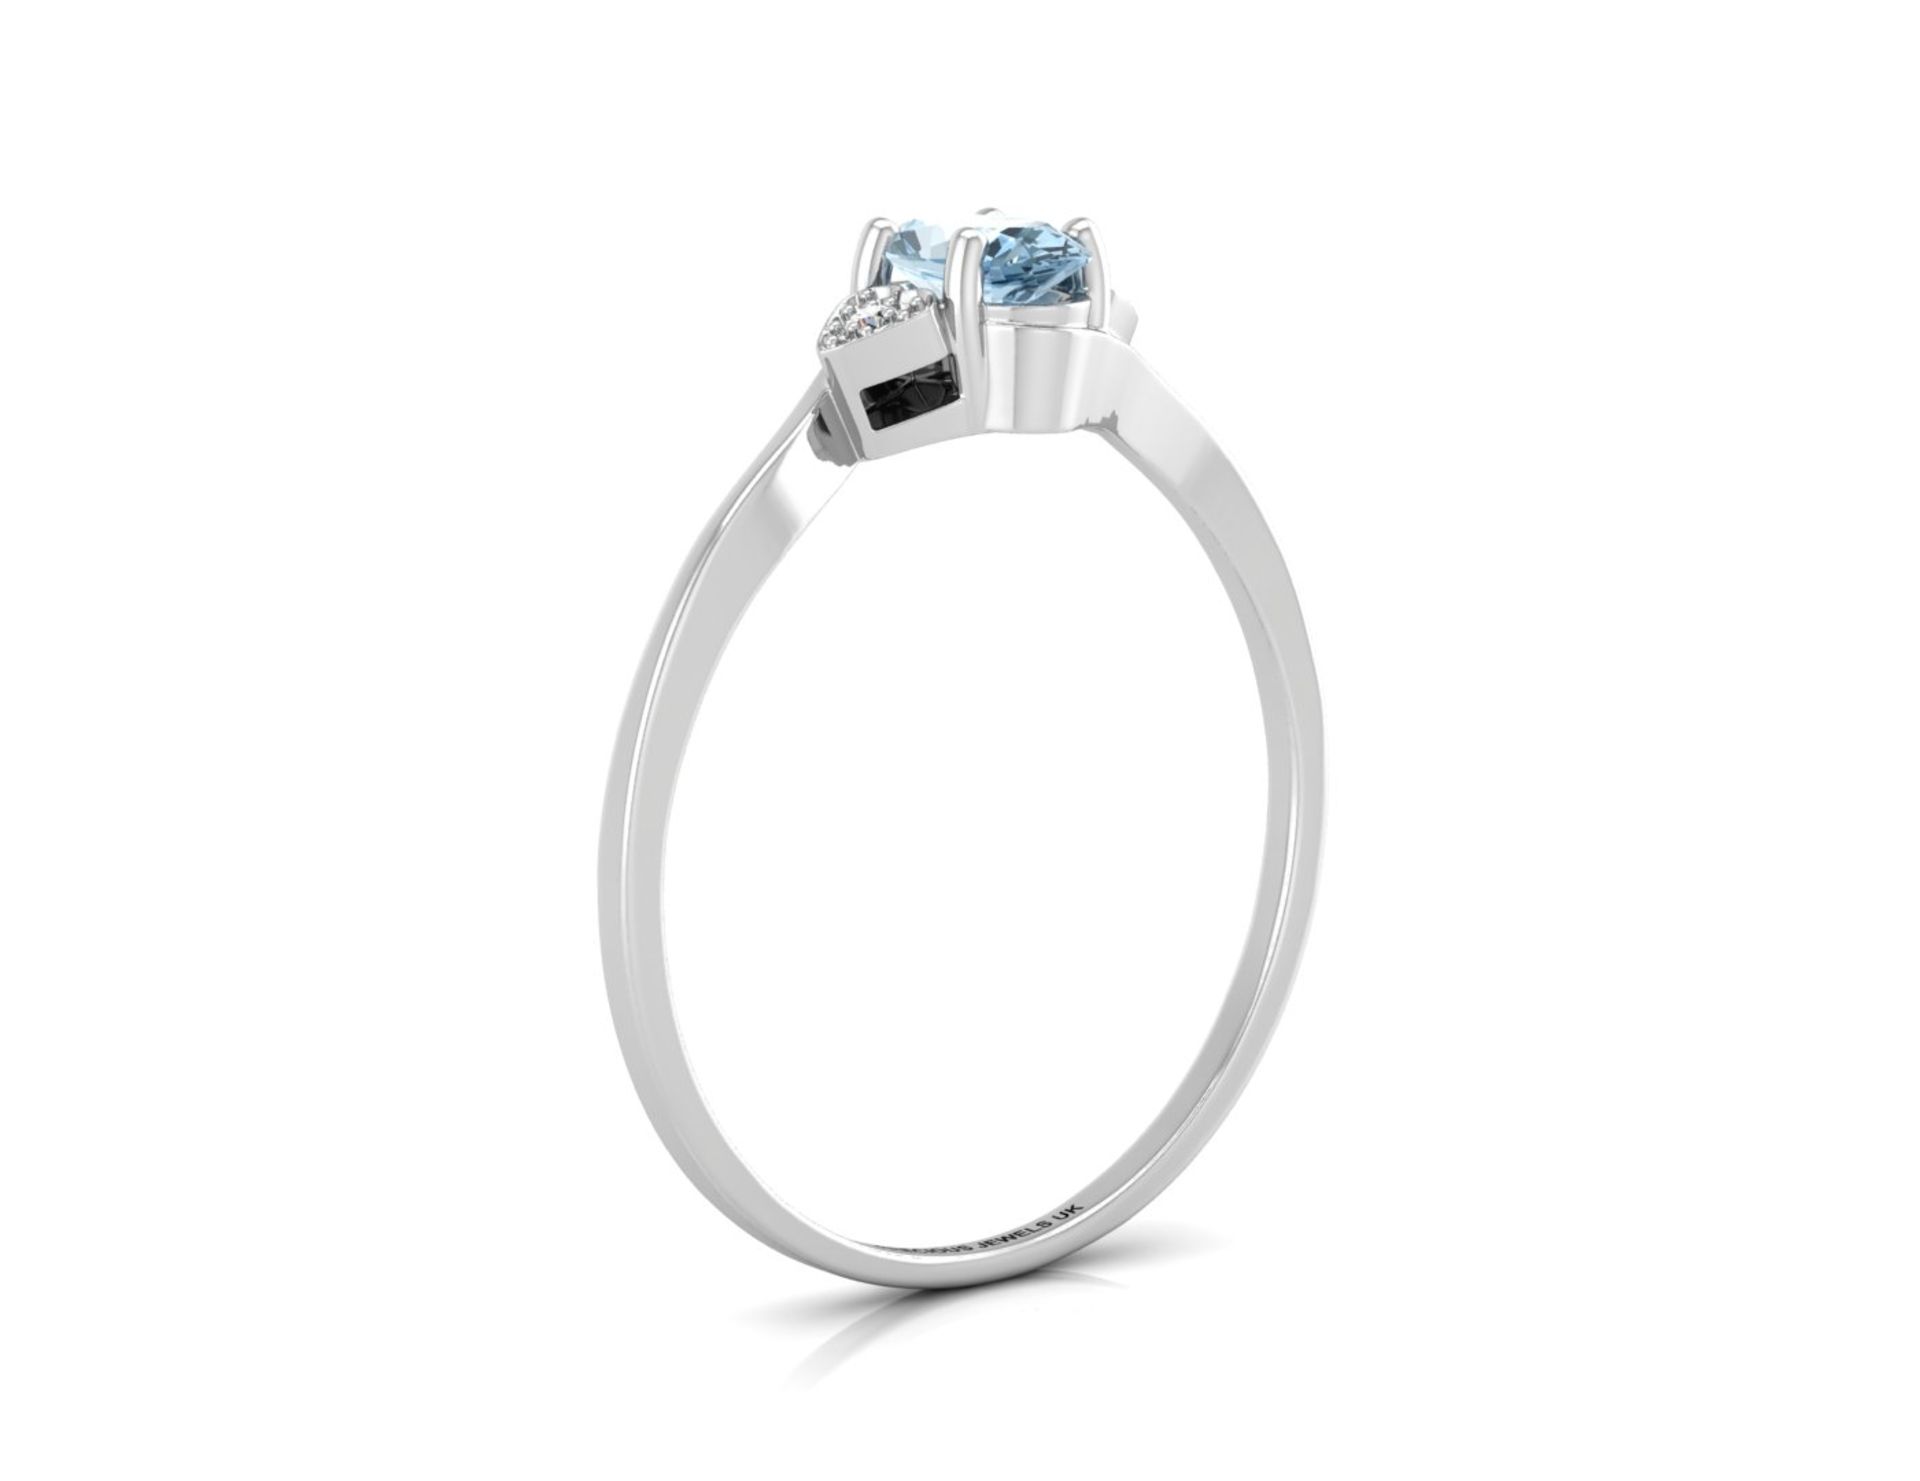 9ct White Gold Fancy Cluster Diamond Blue Topaz Ring 0.01 Carats - Valued by GIE £860.00 - 9ct White - Image 2 of 6